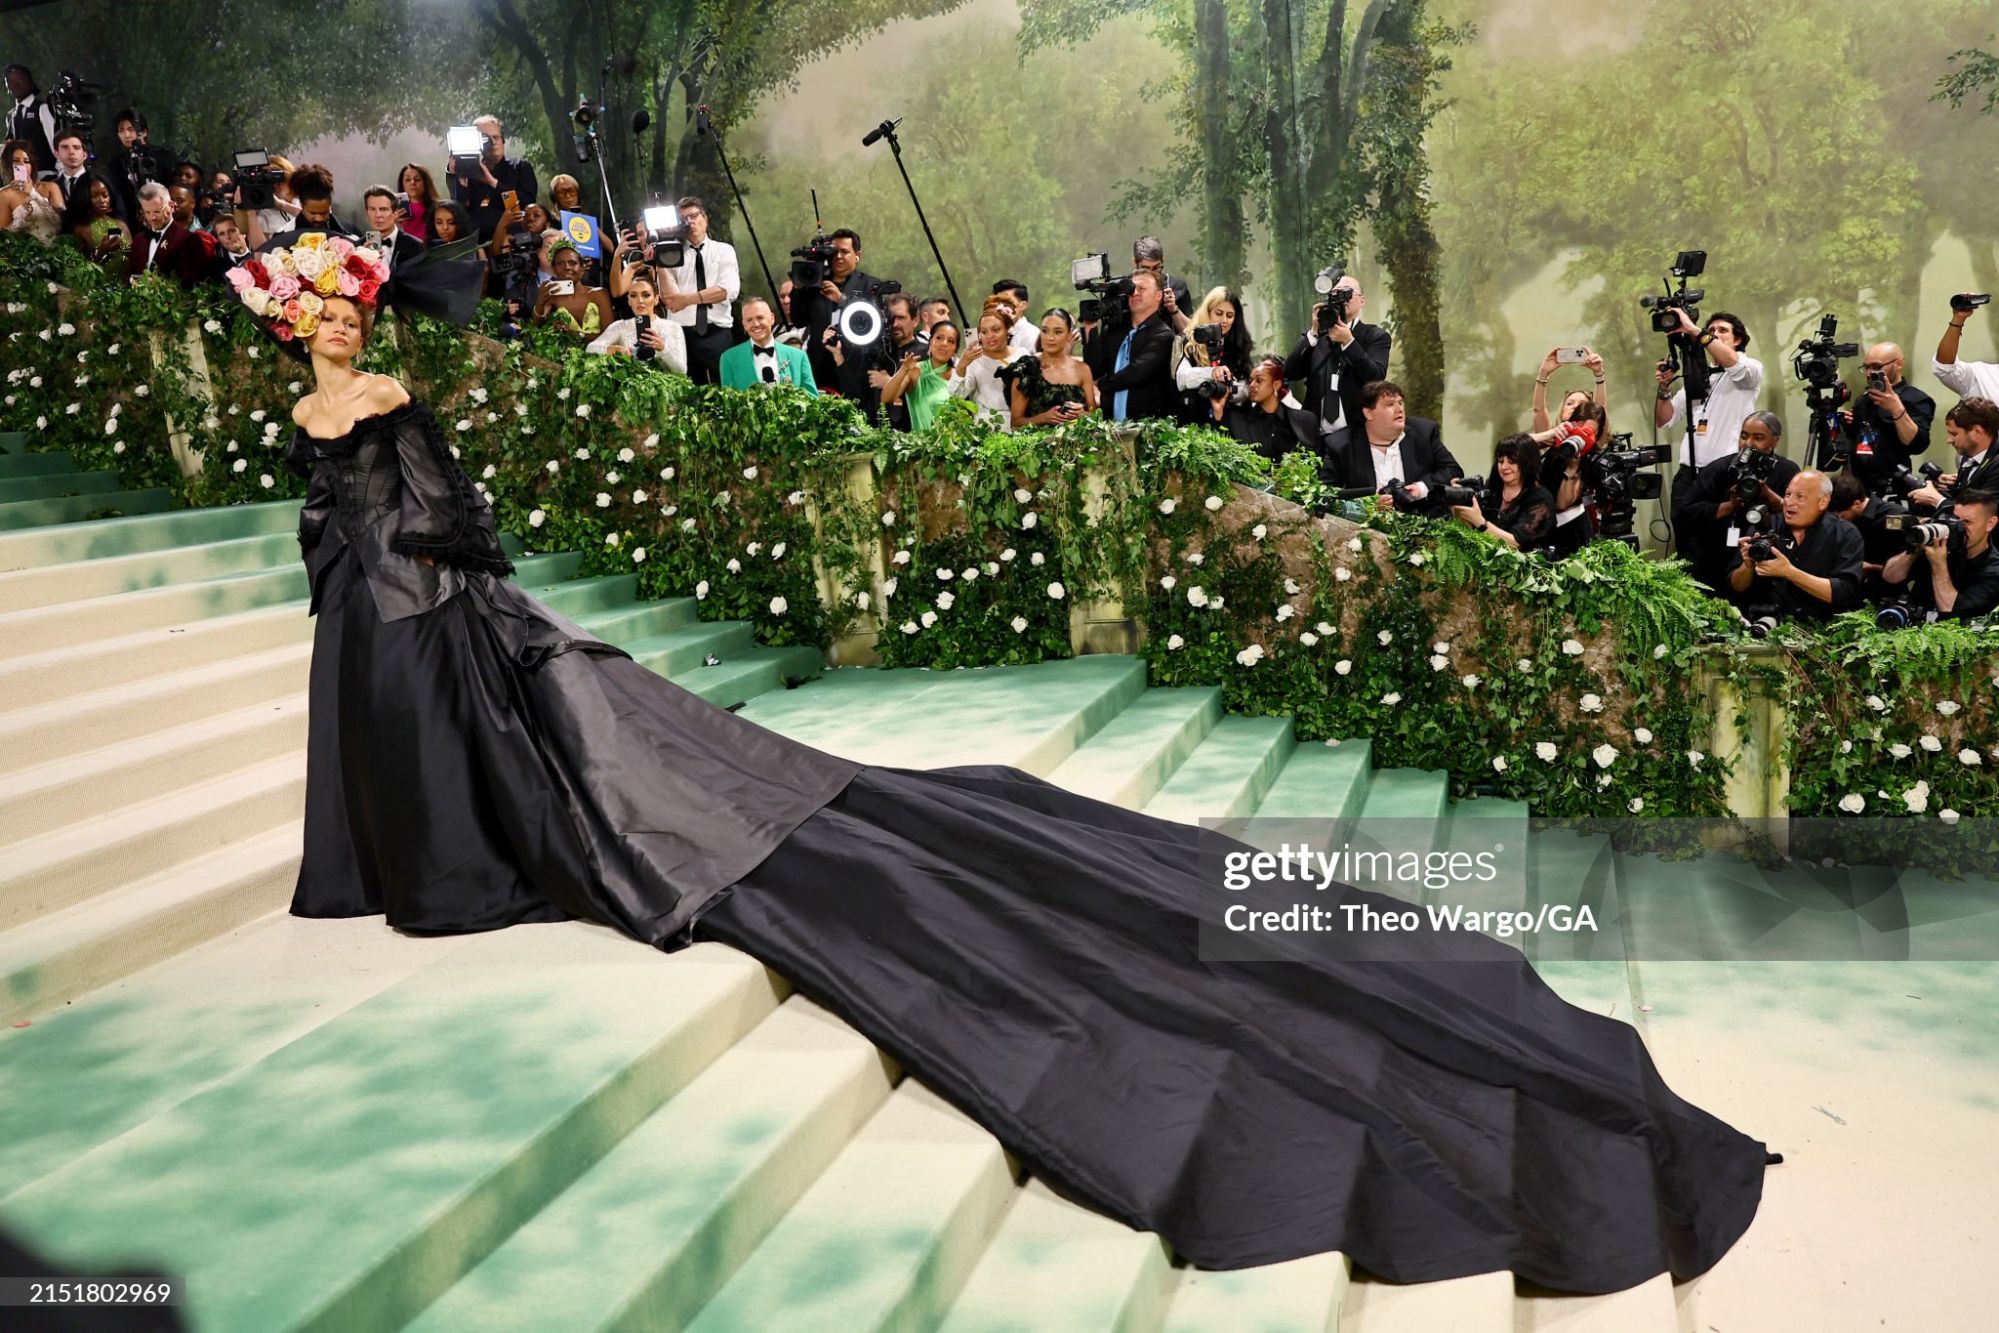 gettyimages-2151802969-2048x2048.jpg